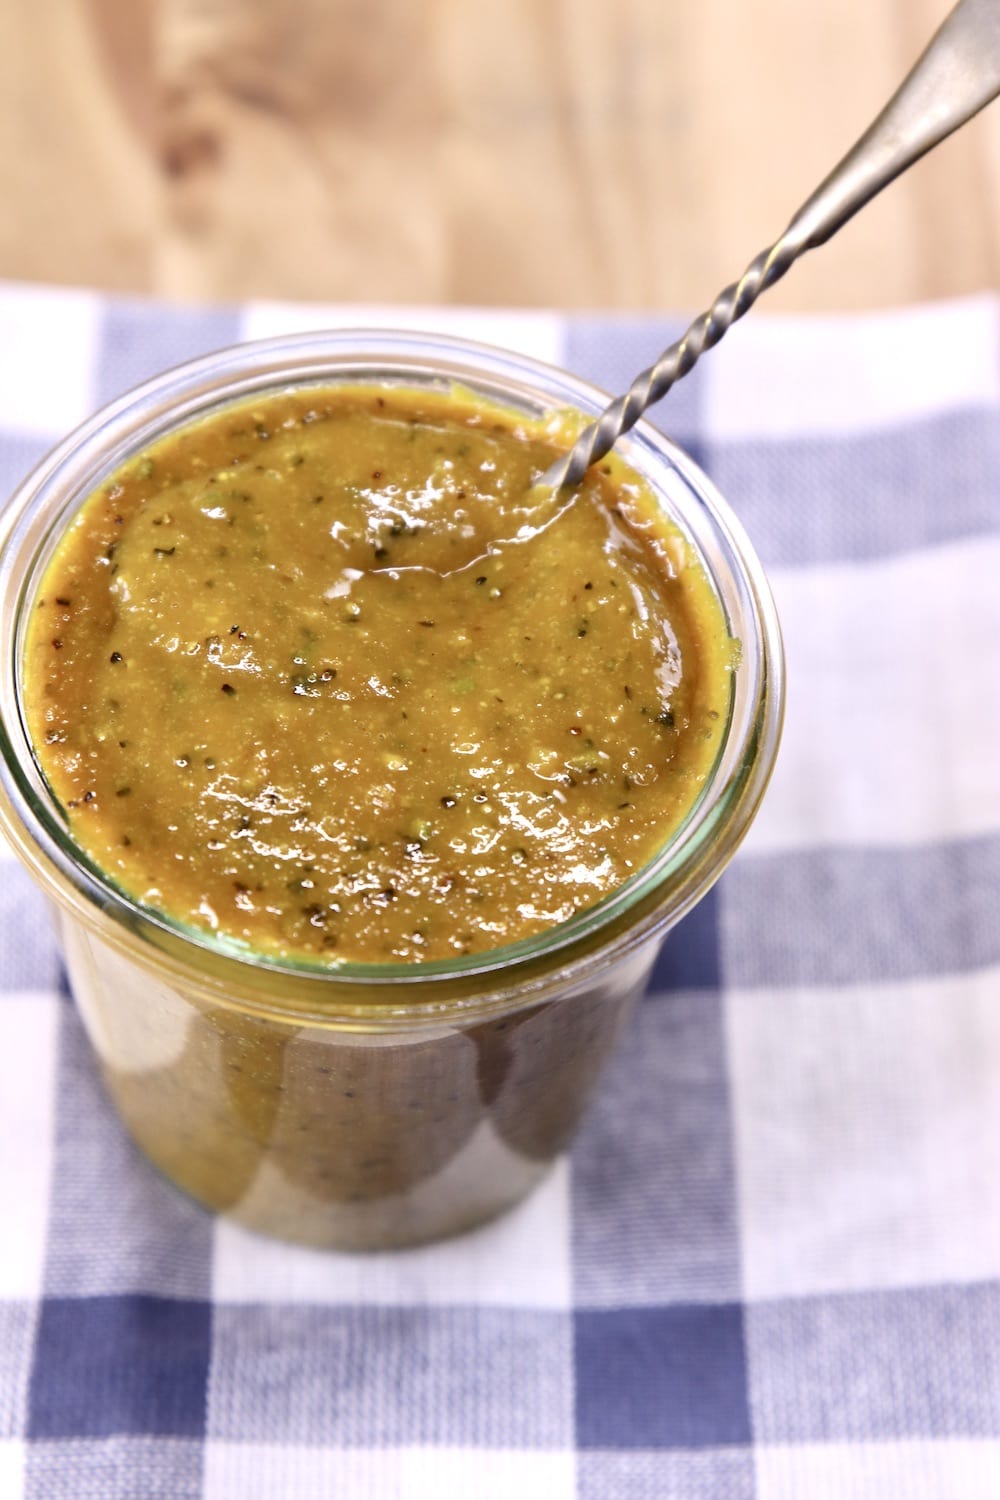 mustard grilling sauce for chicken, pork and burgers